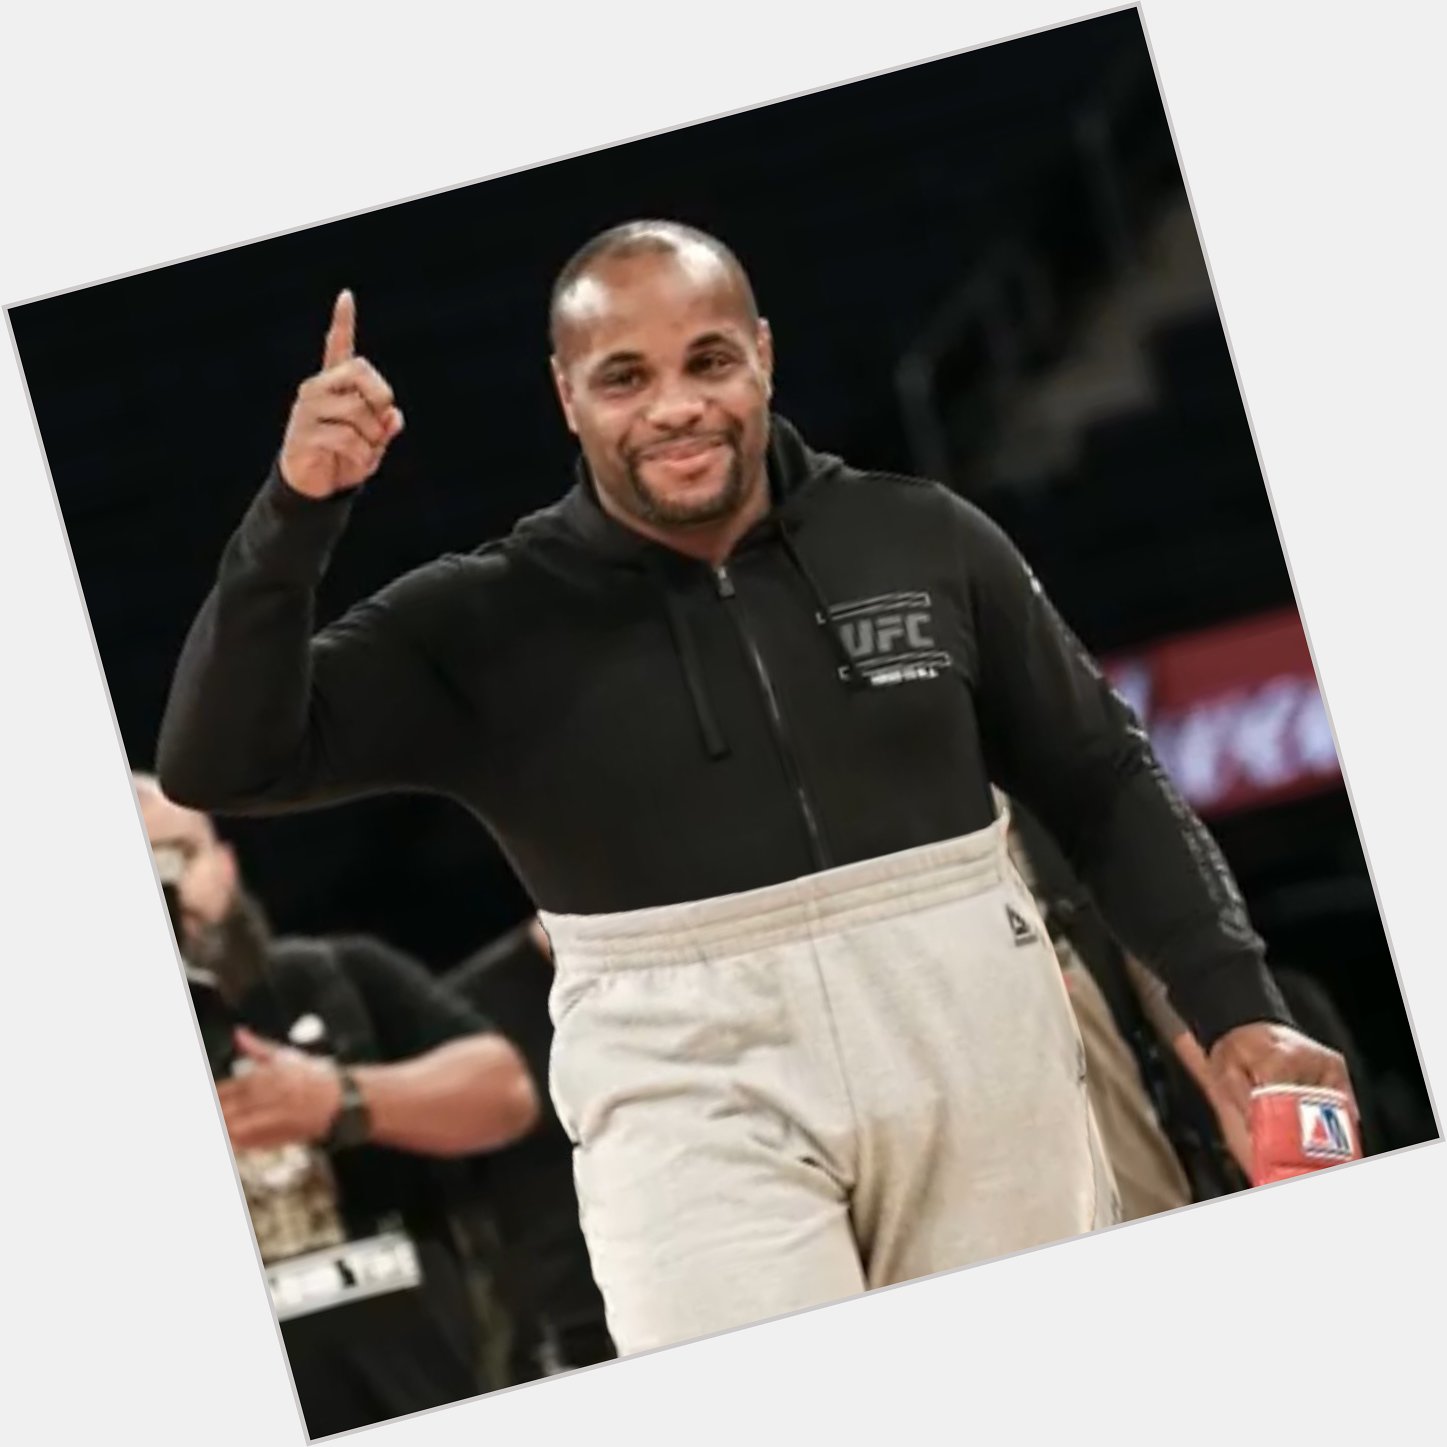 Happy bday to the king of the high pants, Daniel Cormier 